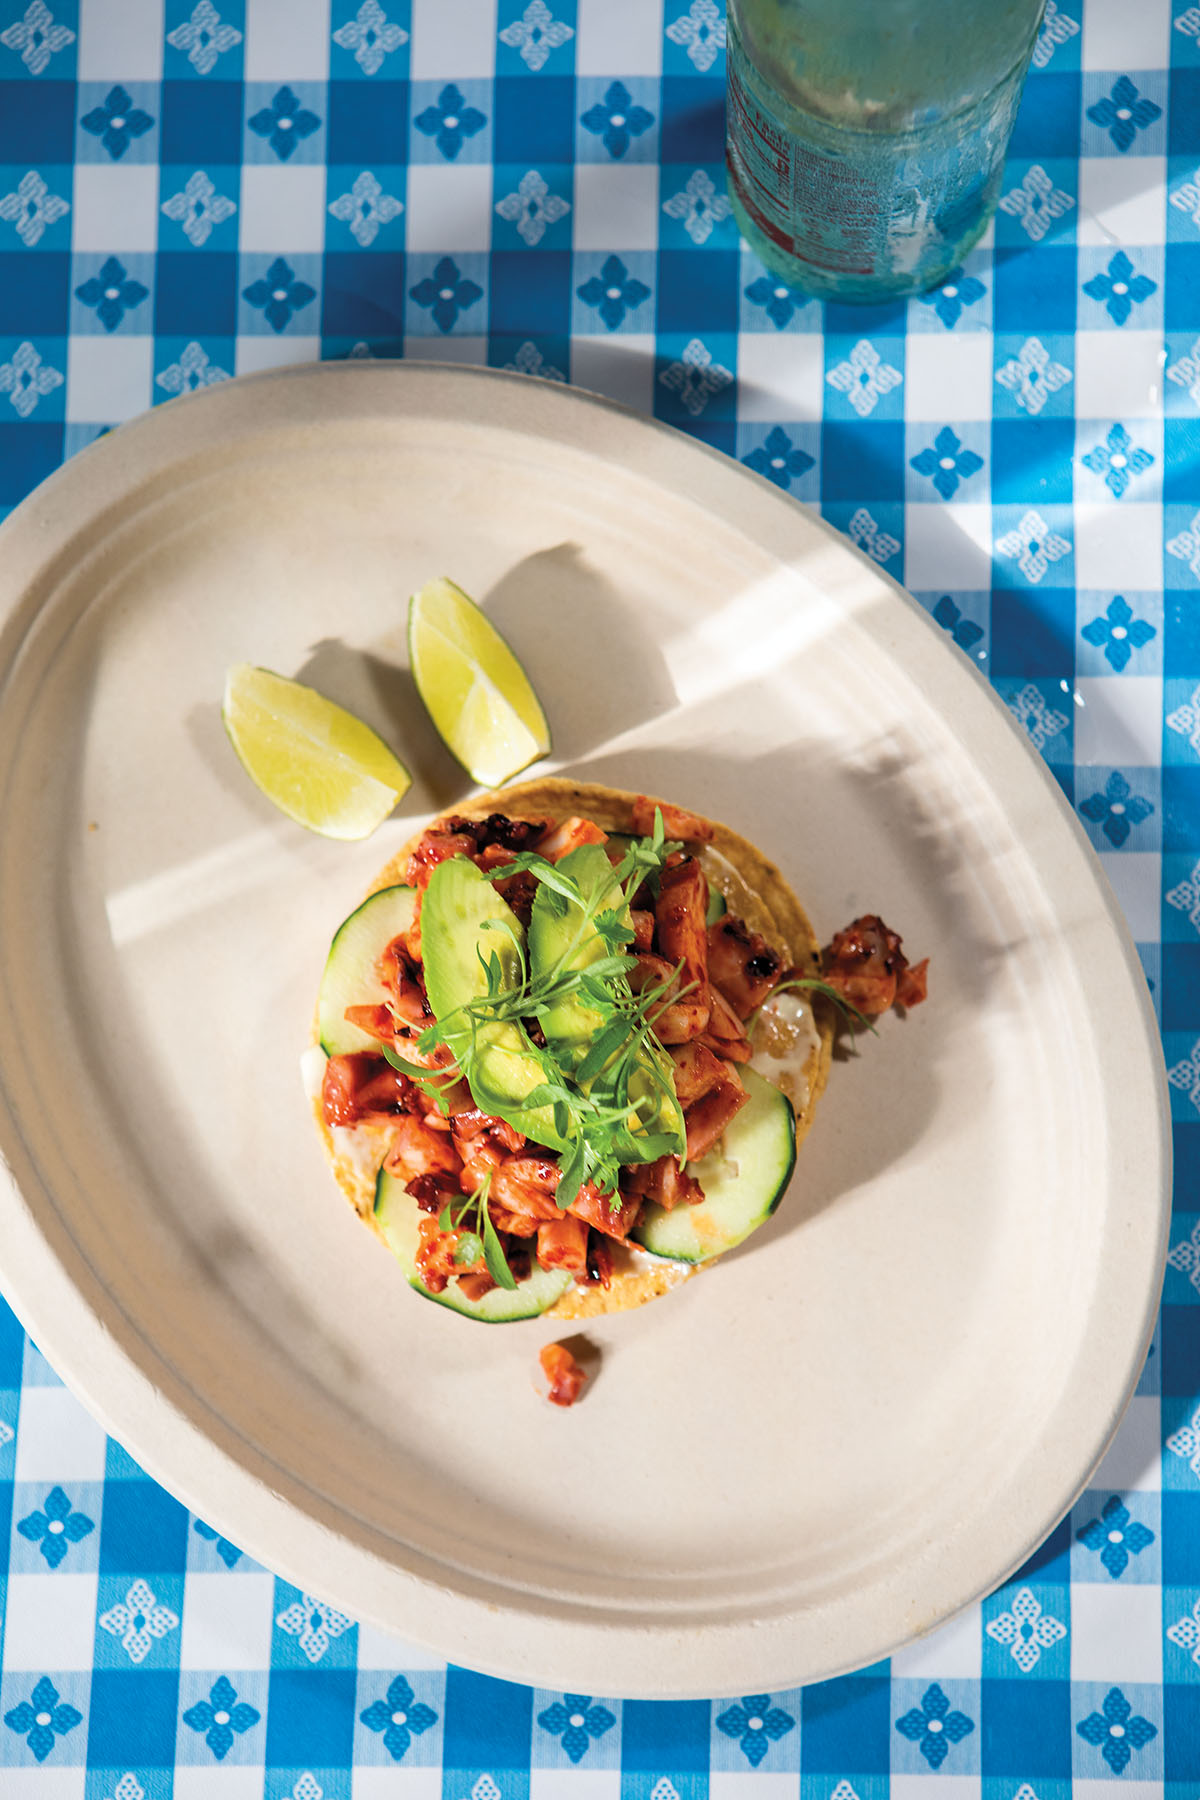 An overhead view of a blue and white checkered tablecloth and a large paper plate holding a taco with bright red topping and avocado